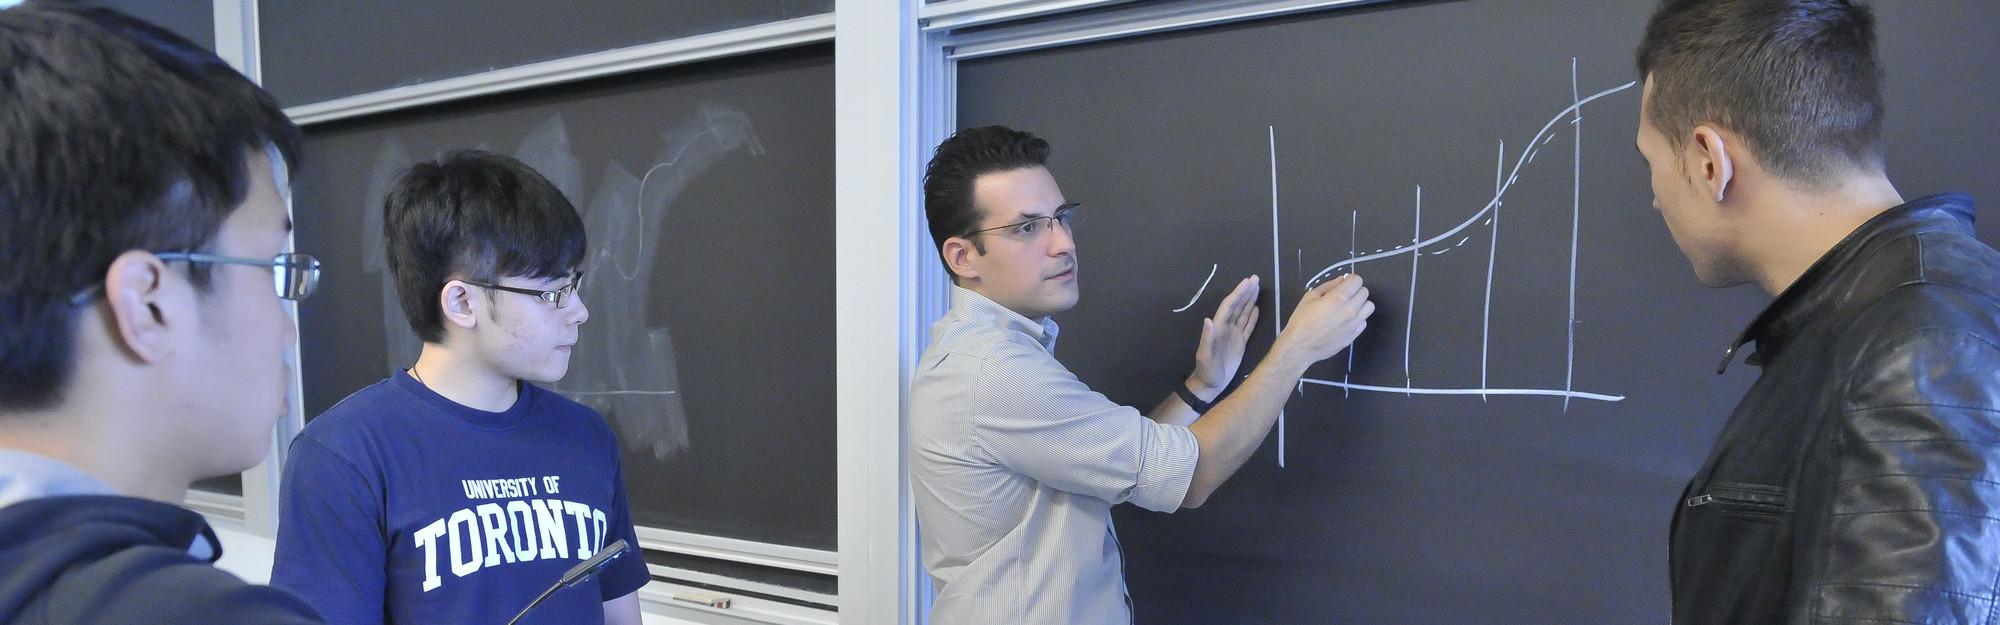 A professor showing a curve on a blackboard with three students looking on